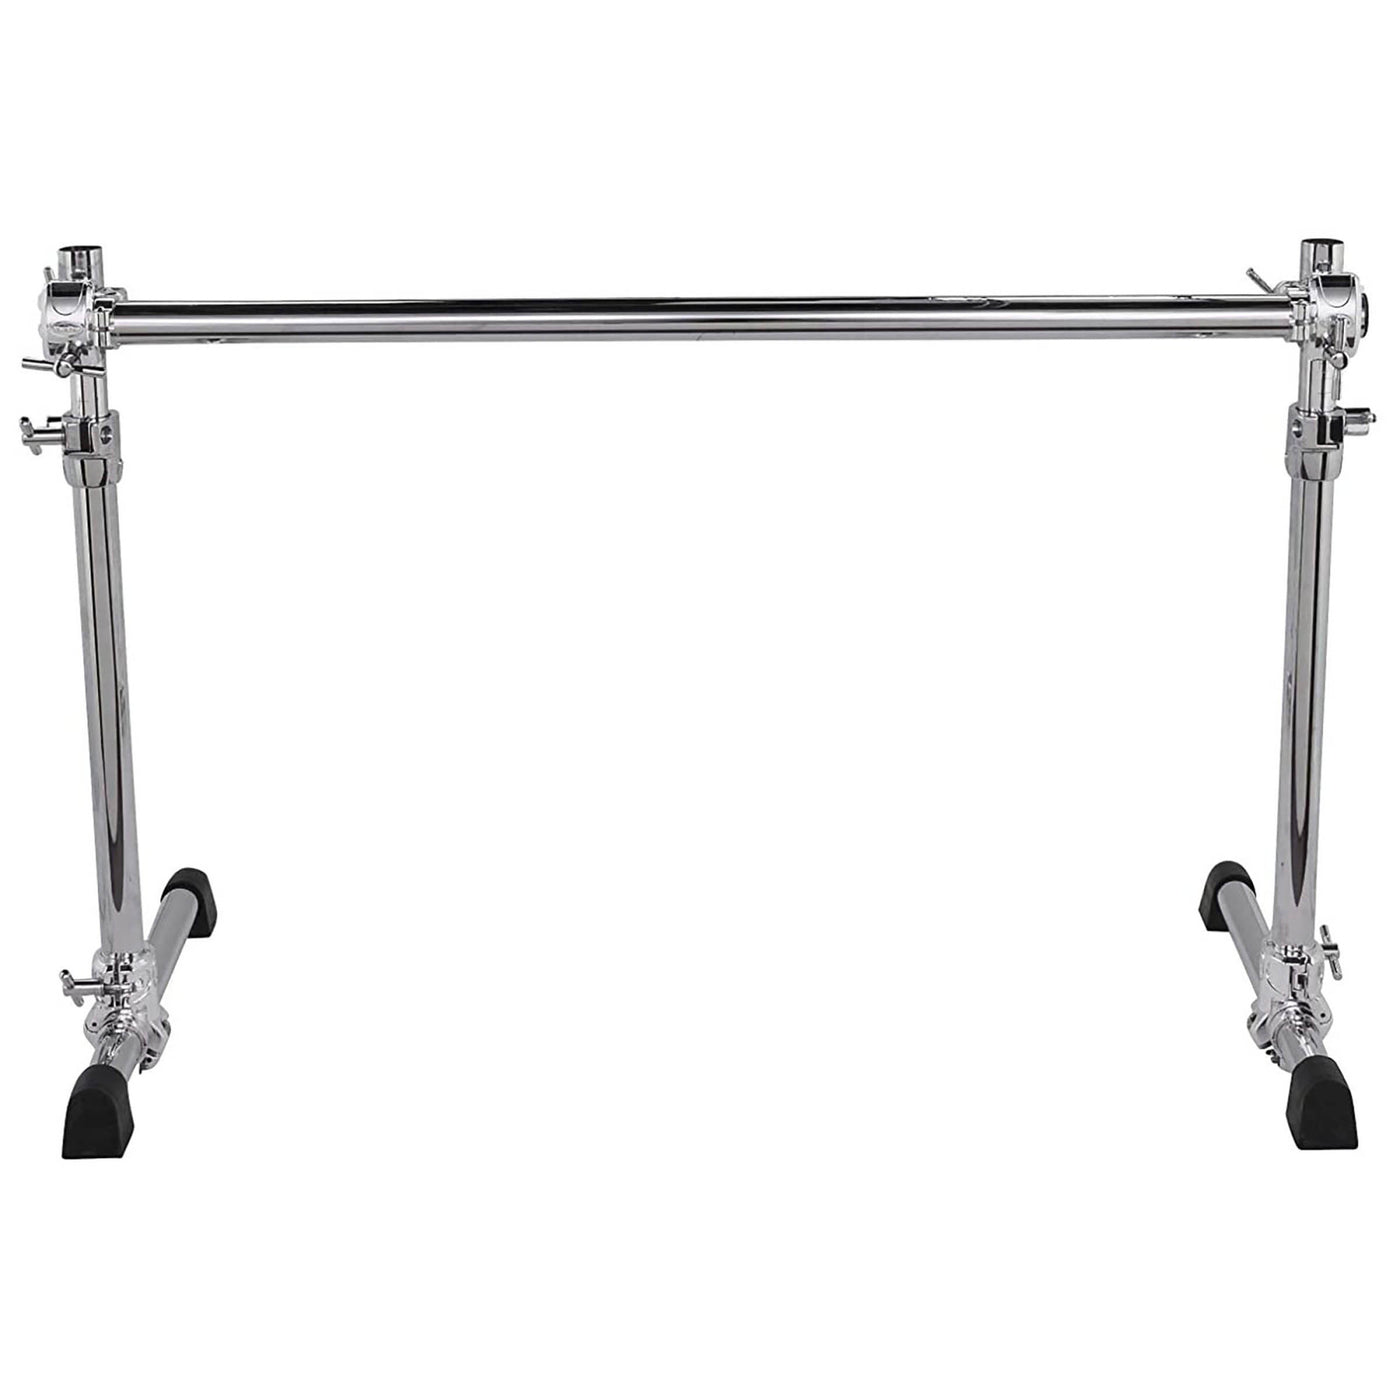 Gibraltar Height Adjustable Curved Rack w/ 2 Cymbal Booms